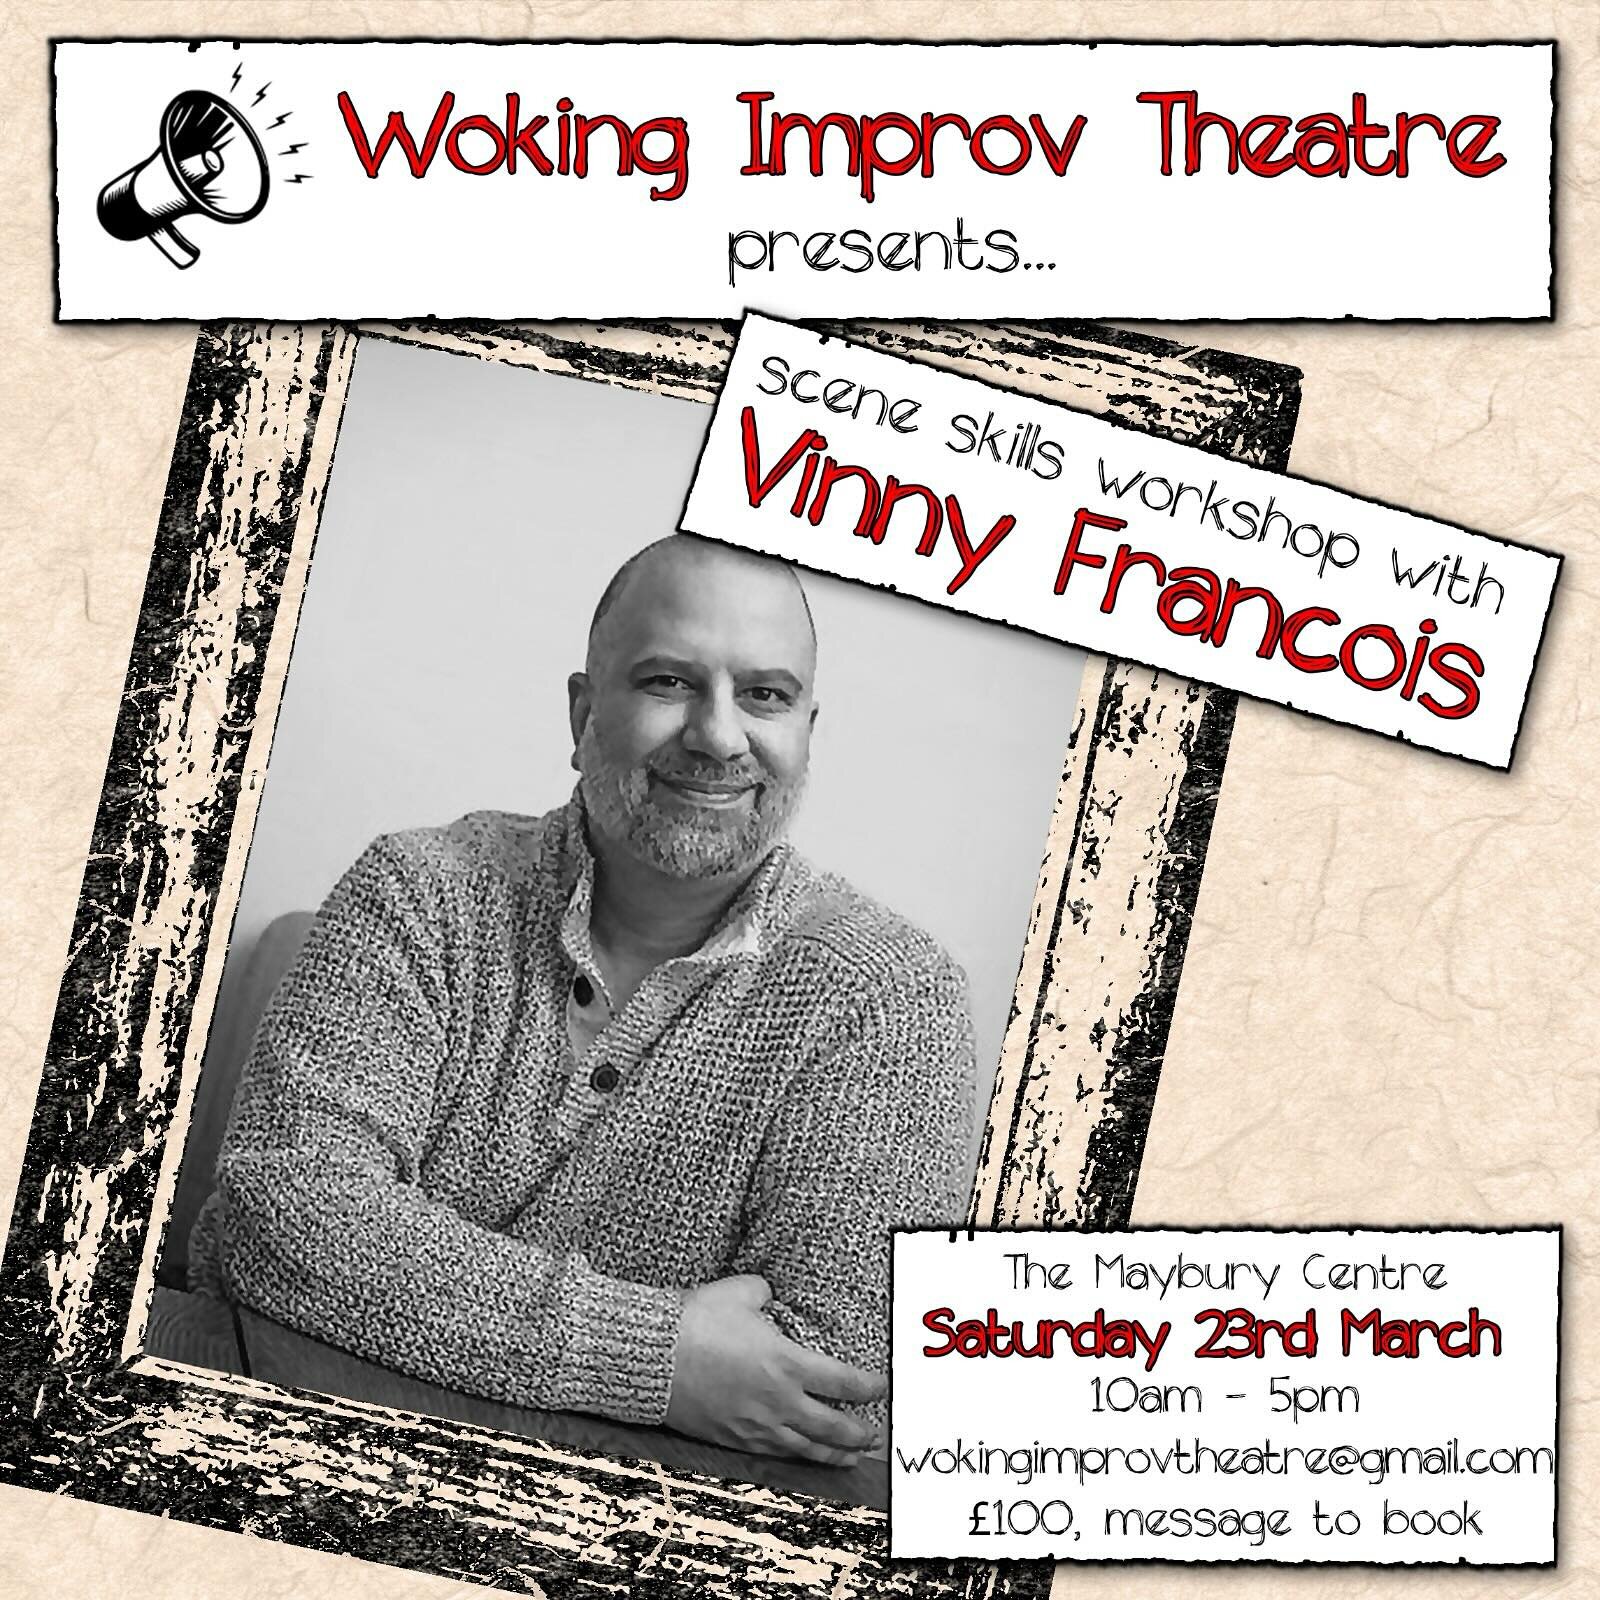 @vinny_francois is coming to Woking! We&rsquo;re so excited to be hosting him and having this totally awesome chance to learn from such an experienced coach and teacher! Vinny will be in Woking on 23/03, working specifically on scene work. Email ASAP